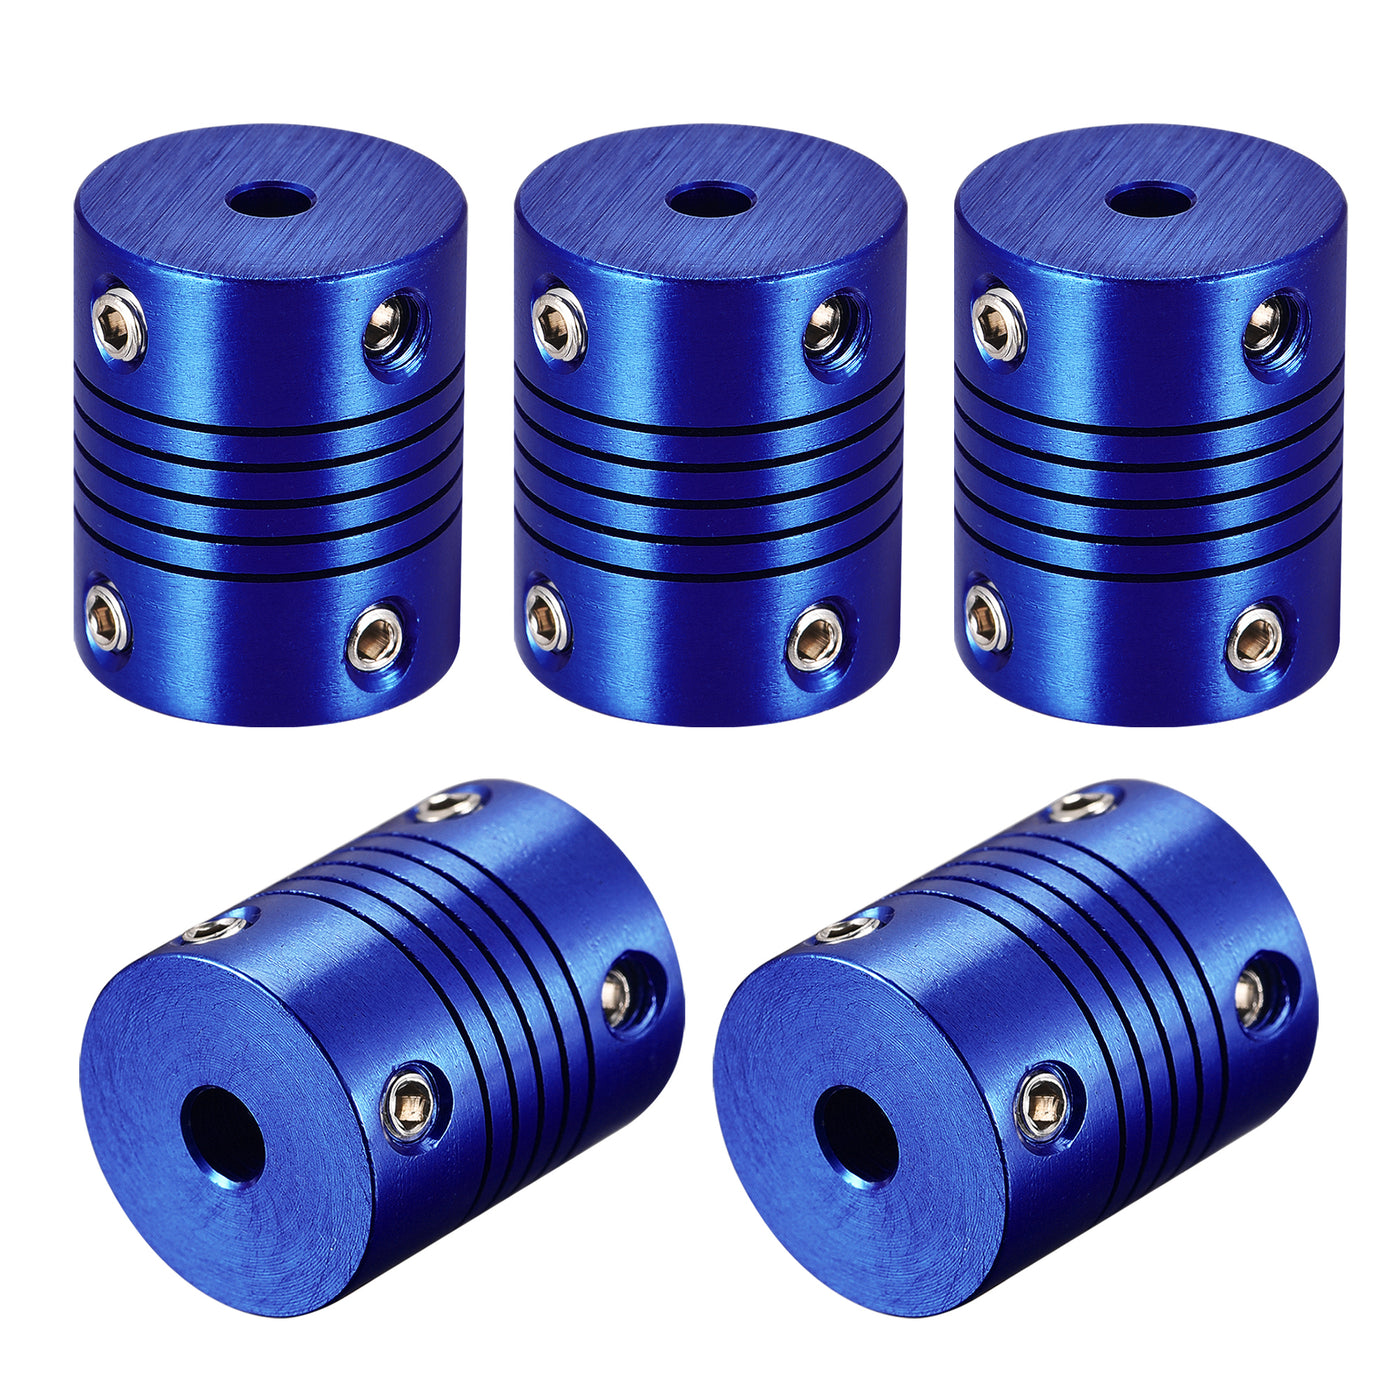 uxcell Uxcell 5 Pcs 5mm to 4mm Aluminum Alloy Shaft Coupling Flexible Coupler L25xD20 Blue